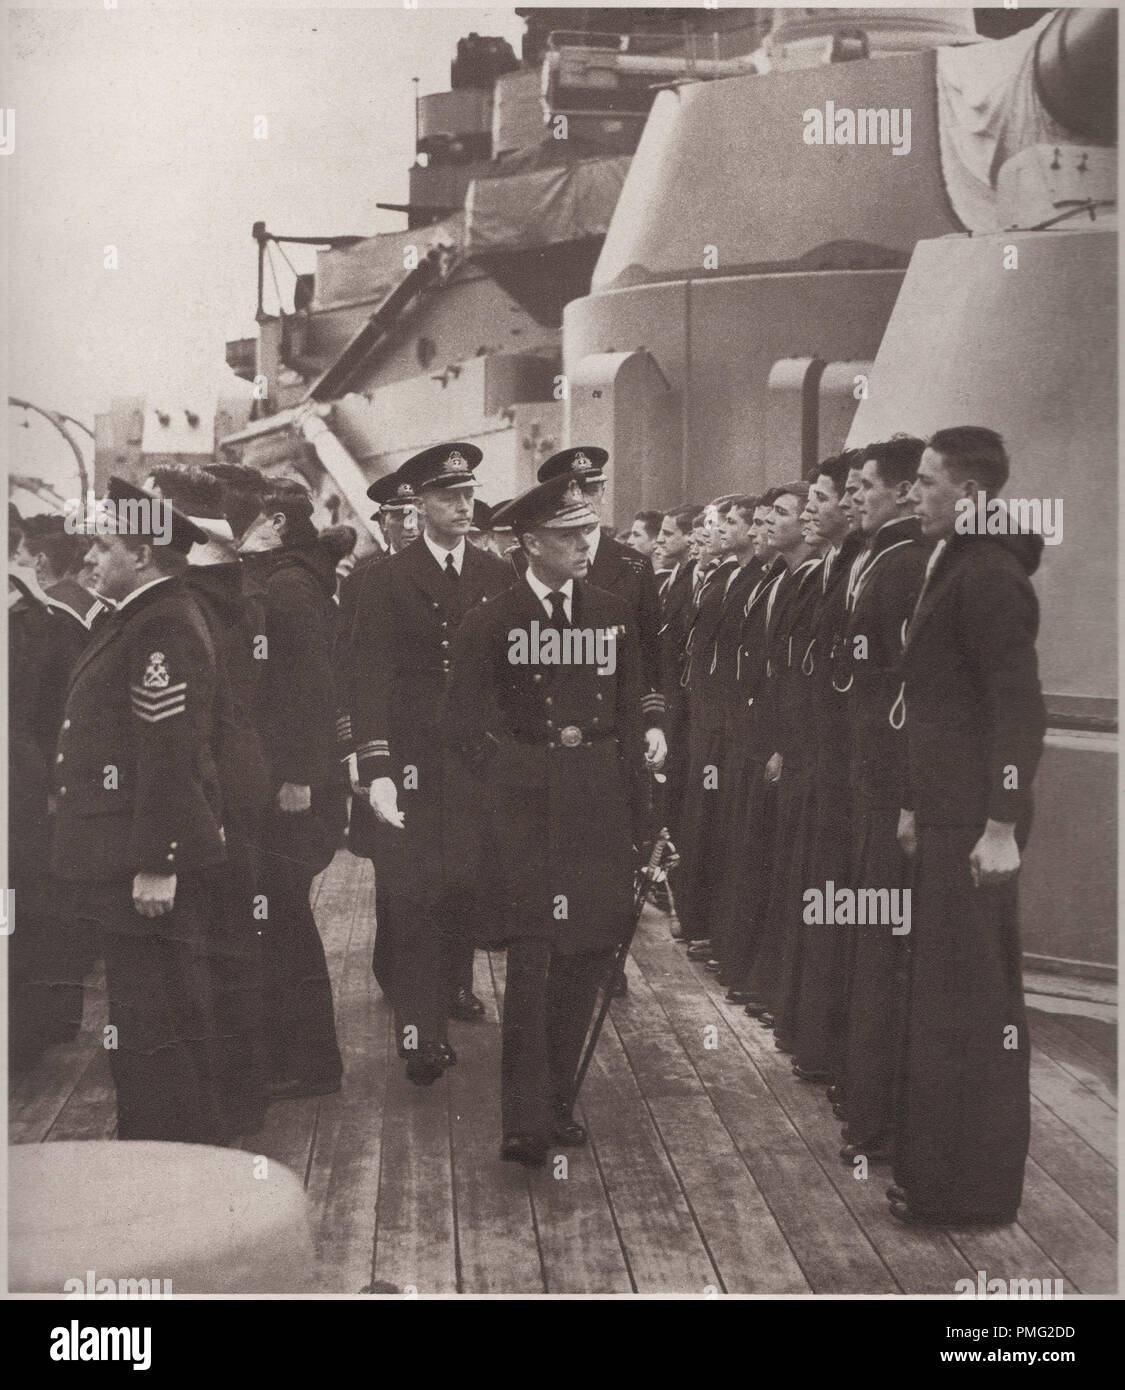 Edward the Eighth in 1936 inspecting crew members on board HMS Royal Oak of the Royal Navy which was later sunk by U-47, 14 October 1939 in Scapa Flow.  Edward VIII later abdicated the throne after seeking to marry Wallis Simpson the divorced American socialite Stock Photo